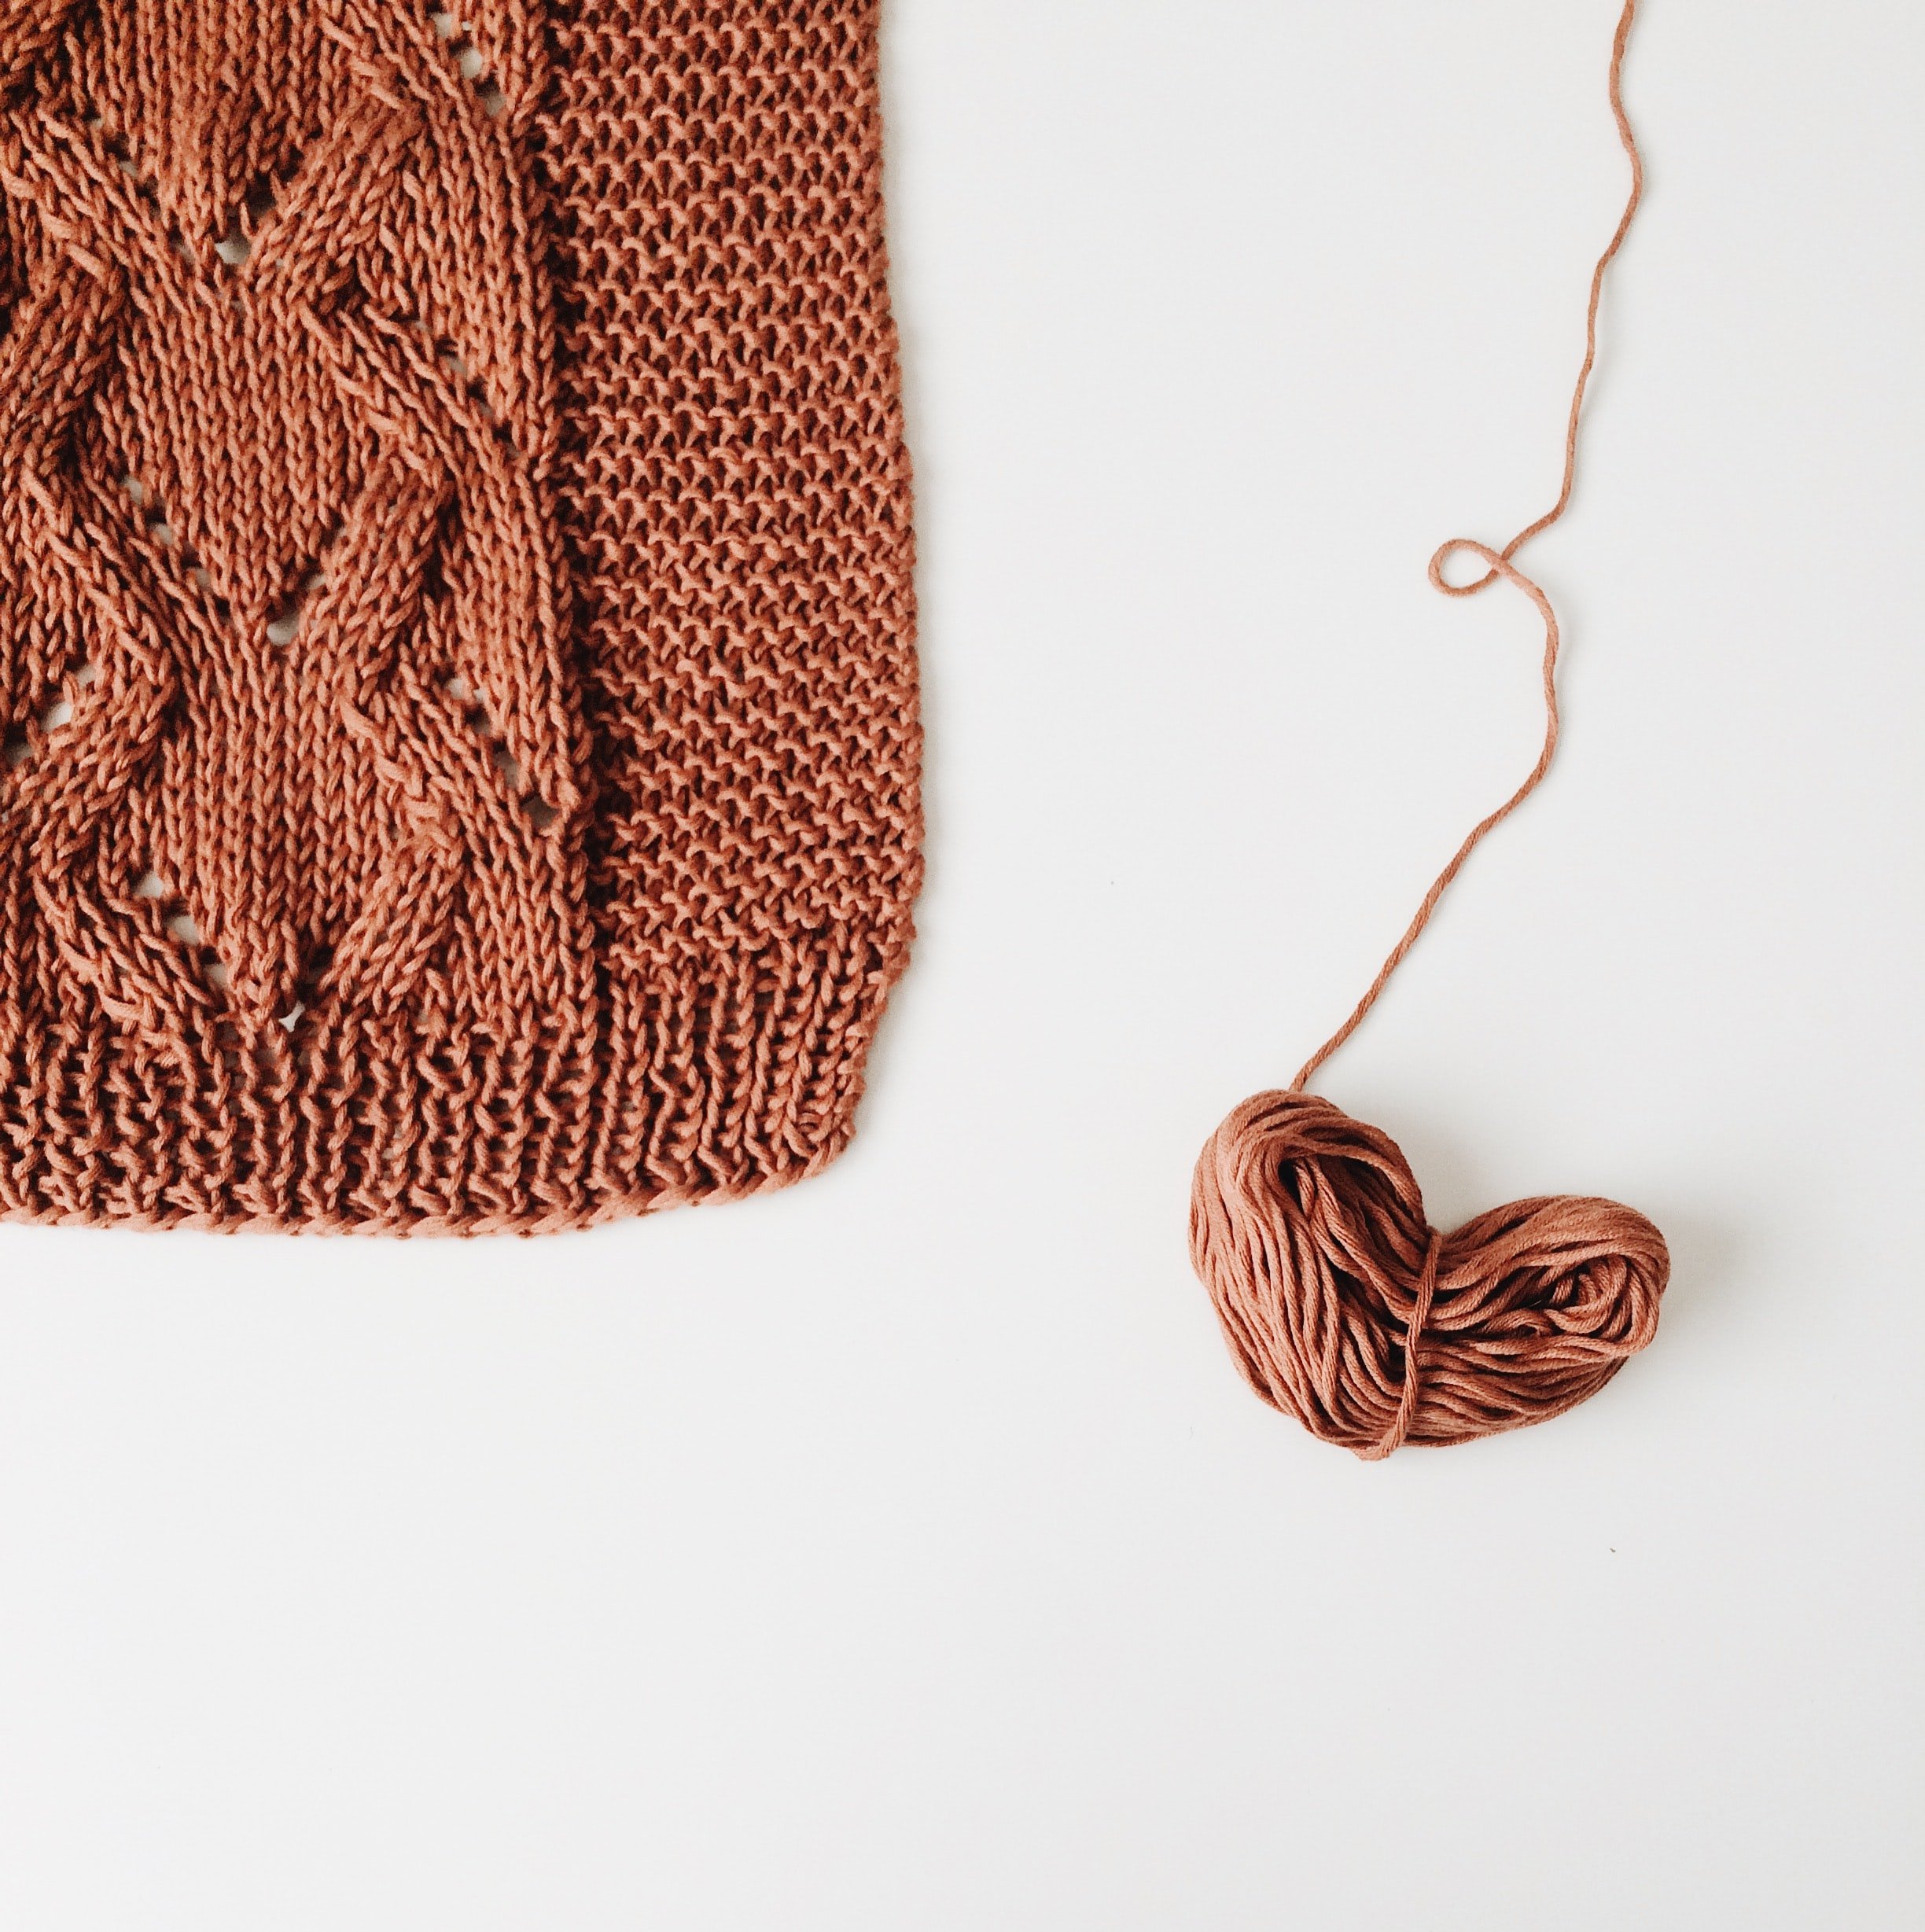 A ball of brown yarn and a portion of a brown knitted sweater | Source: Unsplash